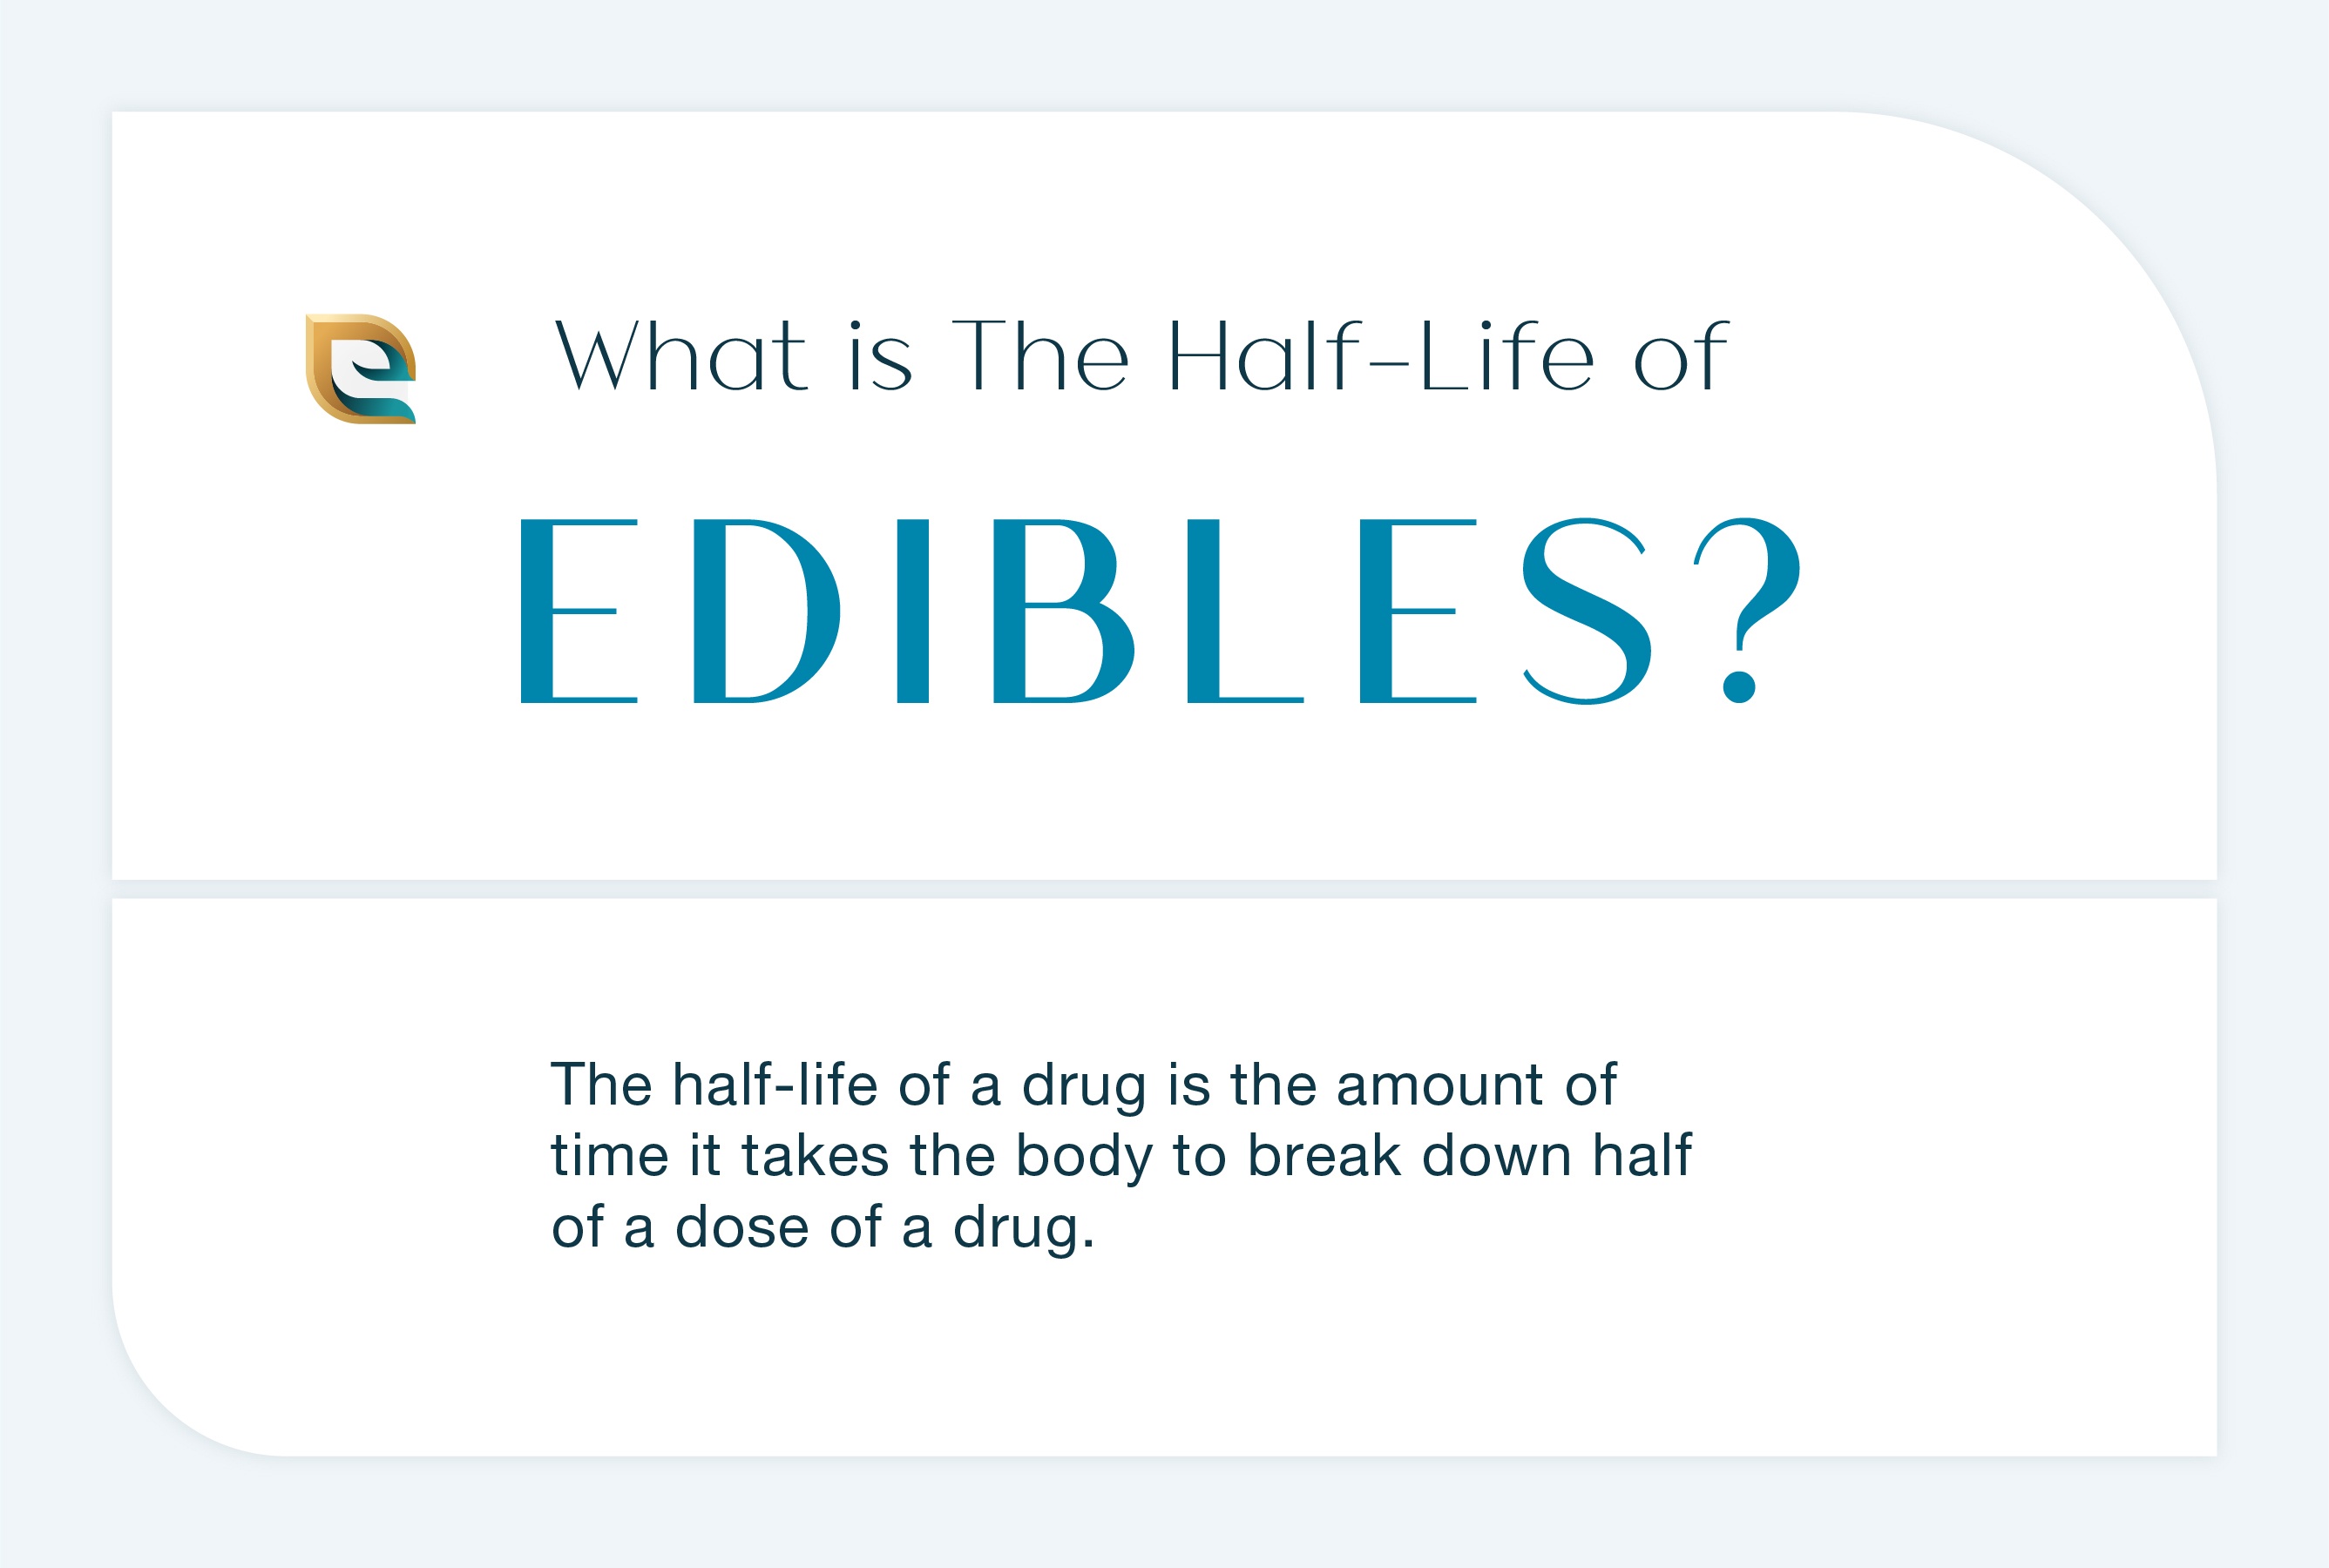 What is the half life of Edibles? This image describes the half life of Edibles